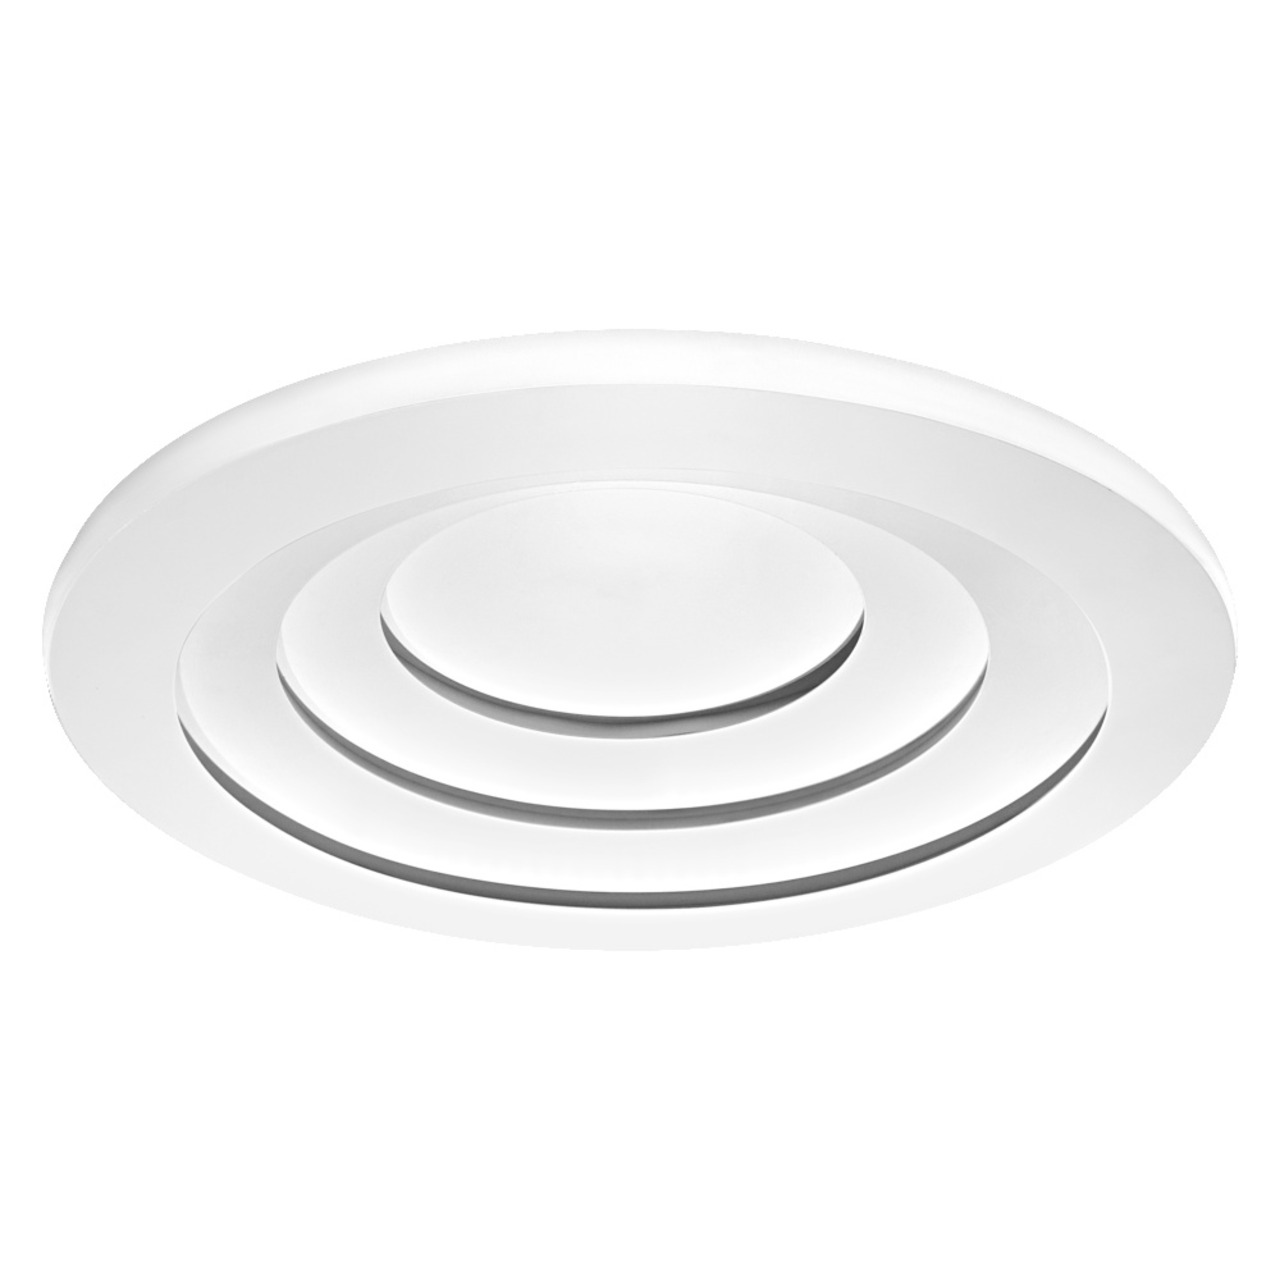 LEDVANCE SMART+ WiFi 40-W-LED-Deckenleuchte ORBIS SPIRAL- 4060 lm- Tunable White- dimmbar